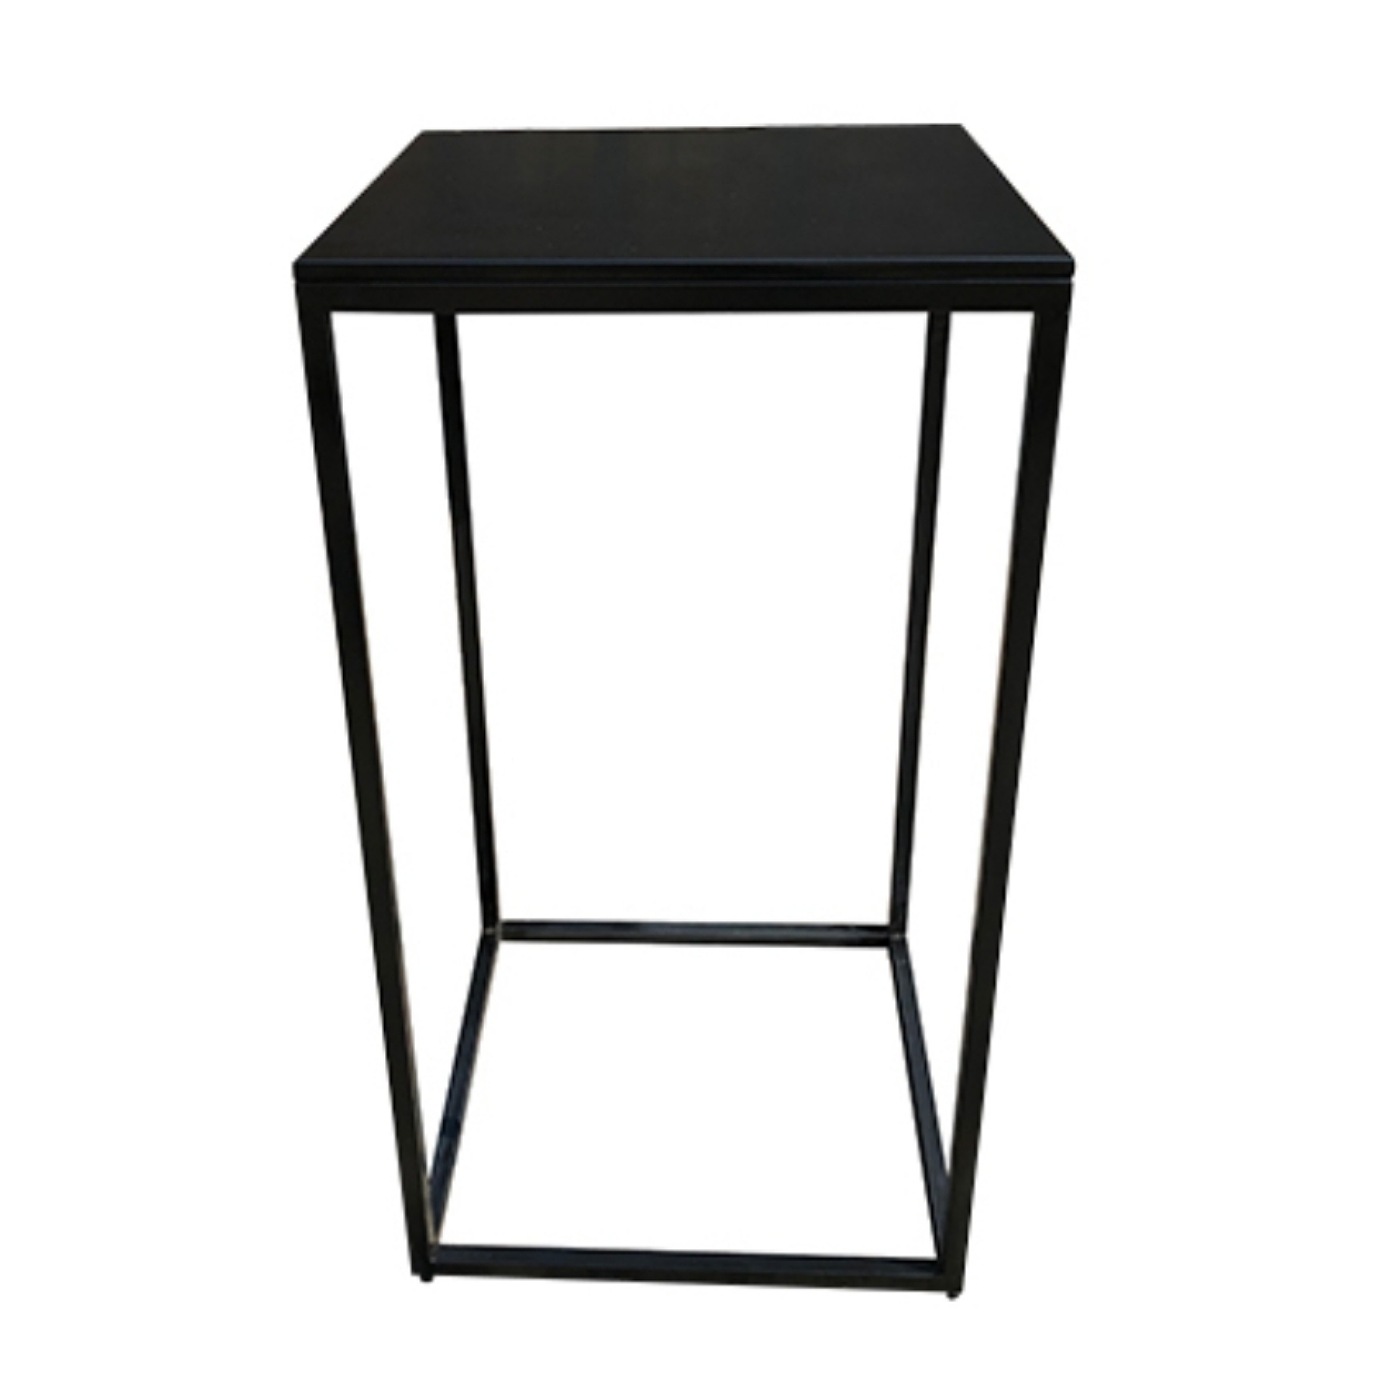 Black Square Frame Cocktail Table With Black Top To Hire